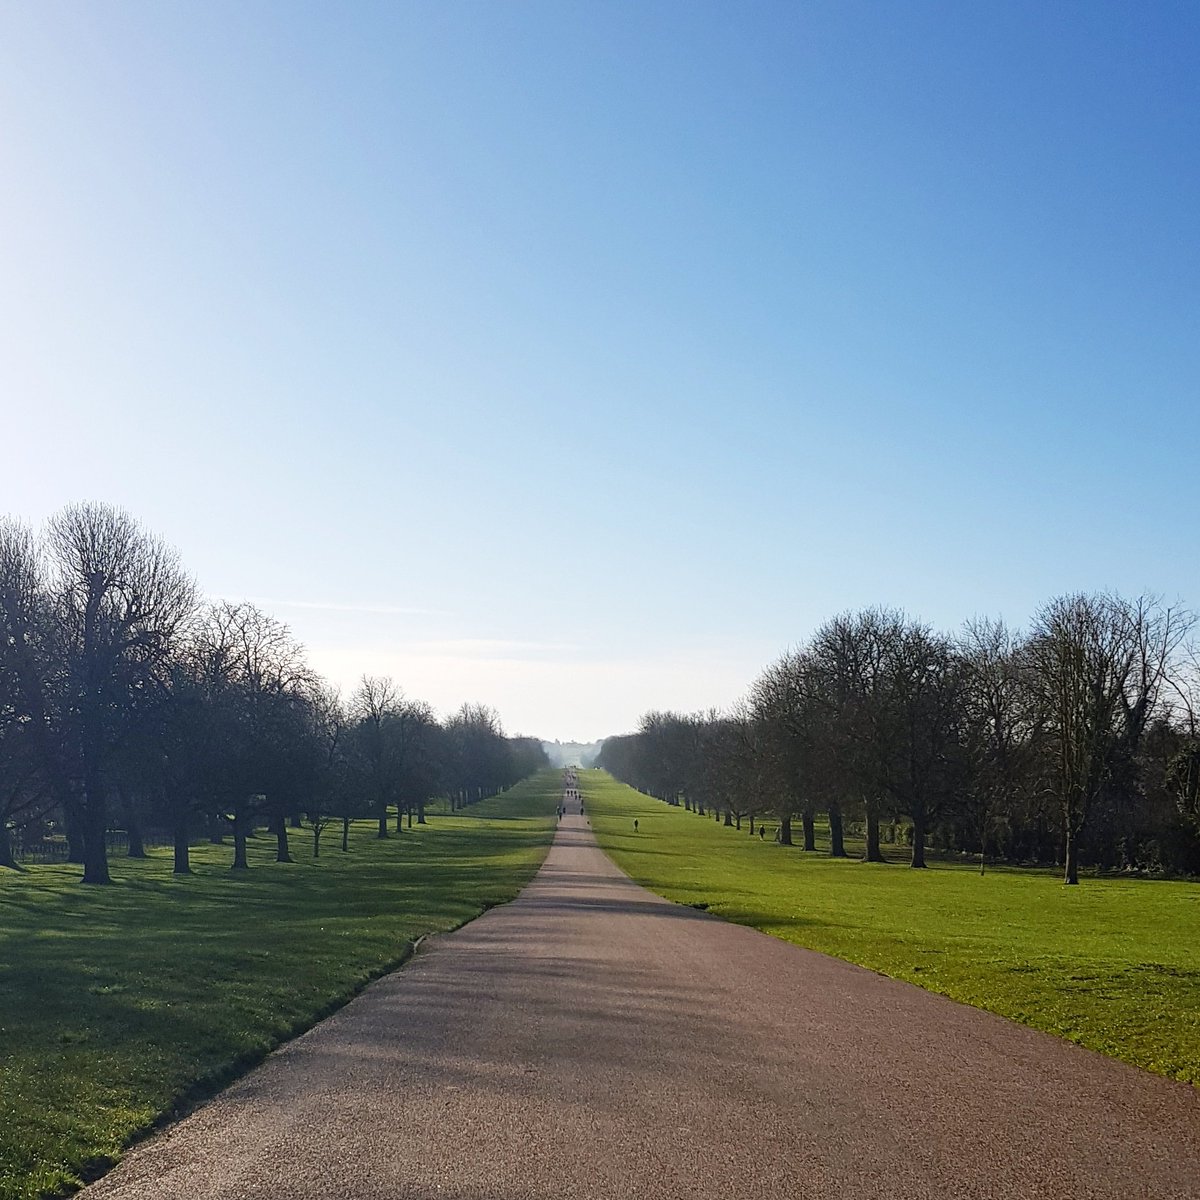 'Just beyond the horizon of the so-called impossible, lies infinite possibility!' ☝️

Just some posh quotes and fancy photos to perk you up this Friday Afternoon! 😊

Happy Weekend Everyone! 👏

#windsor #park #greatpark #castle #windsorcastle #quote #uk #royals #queen